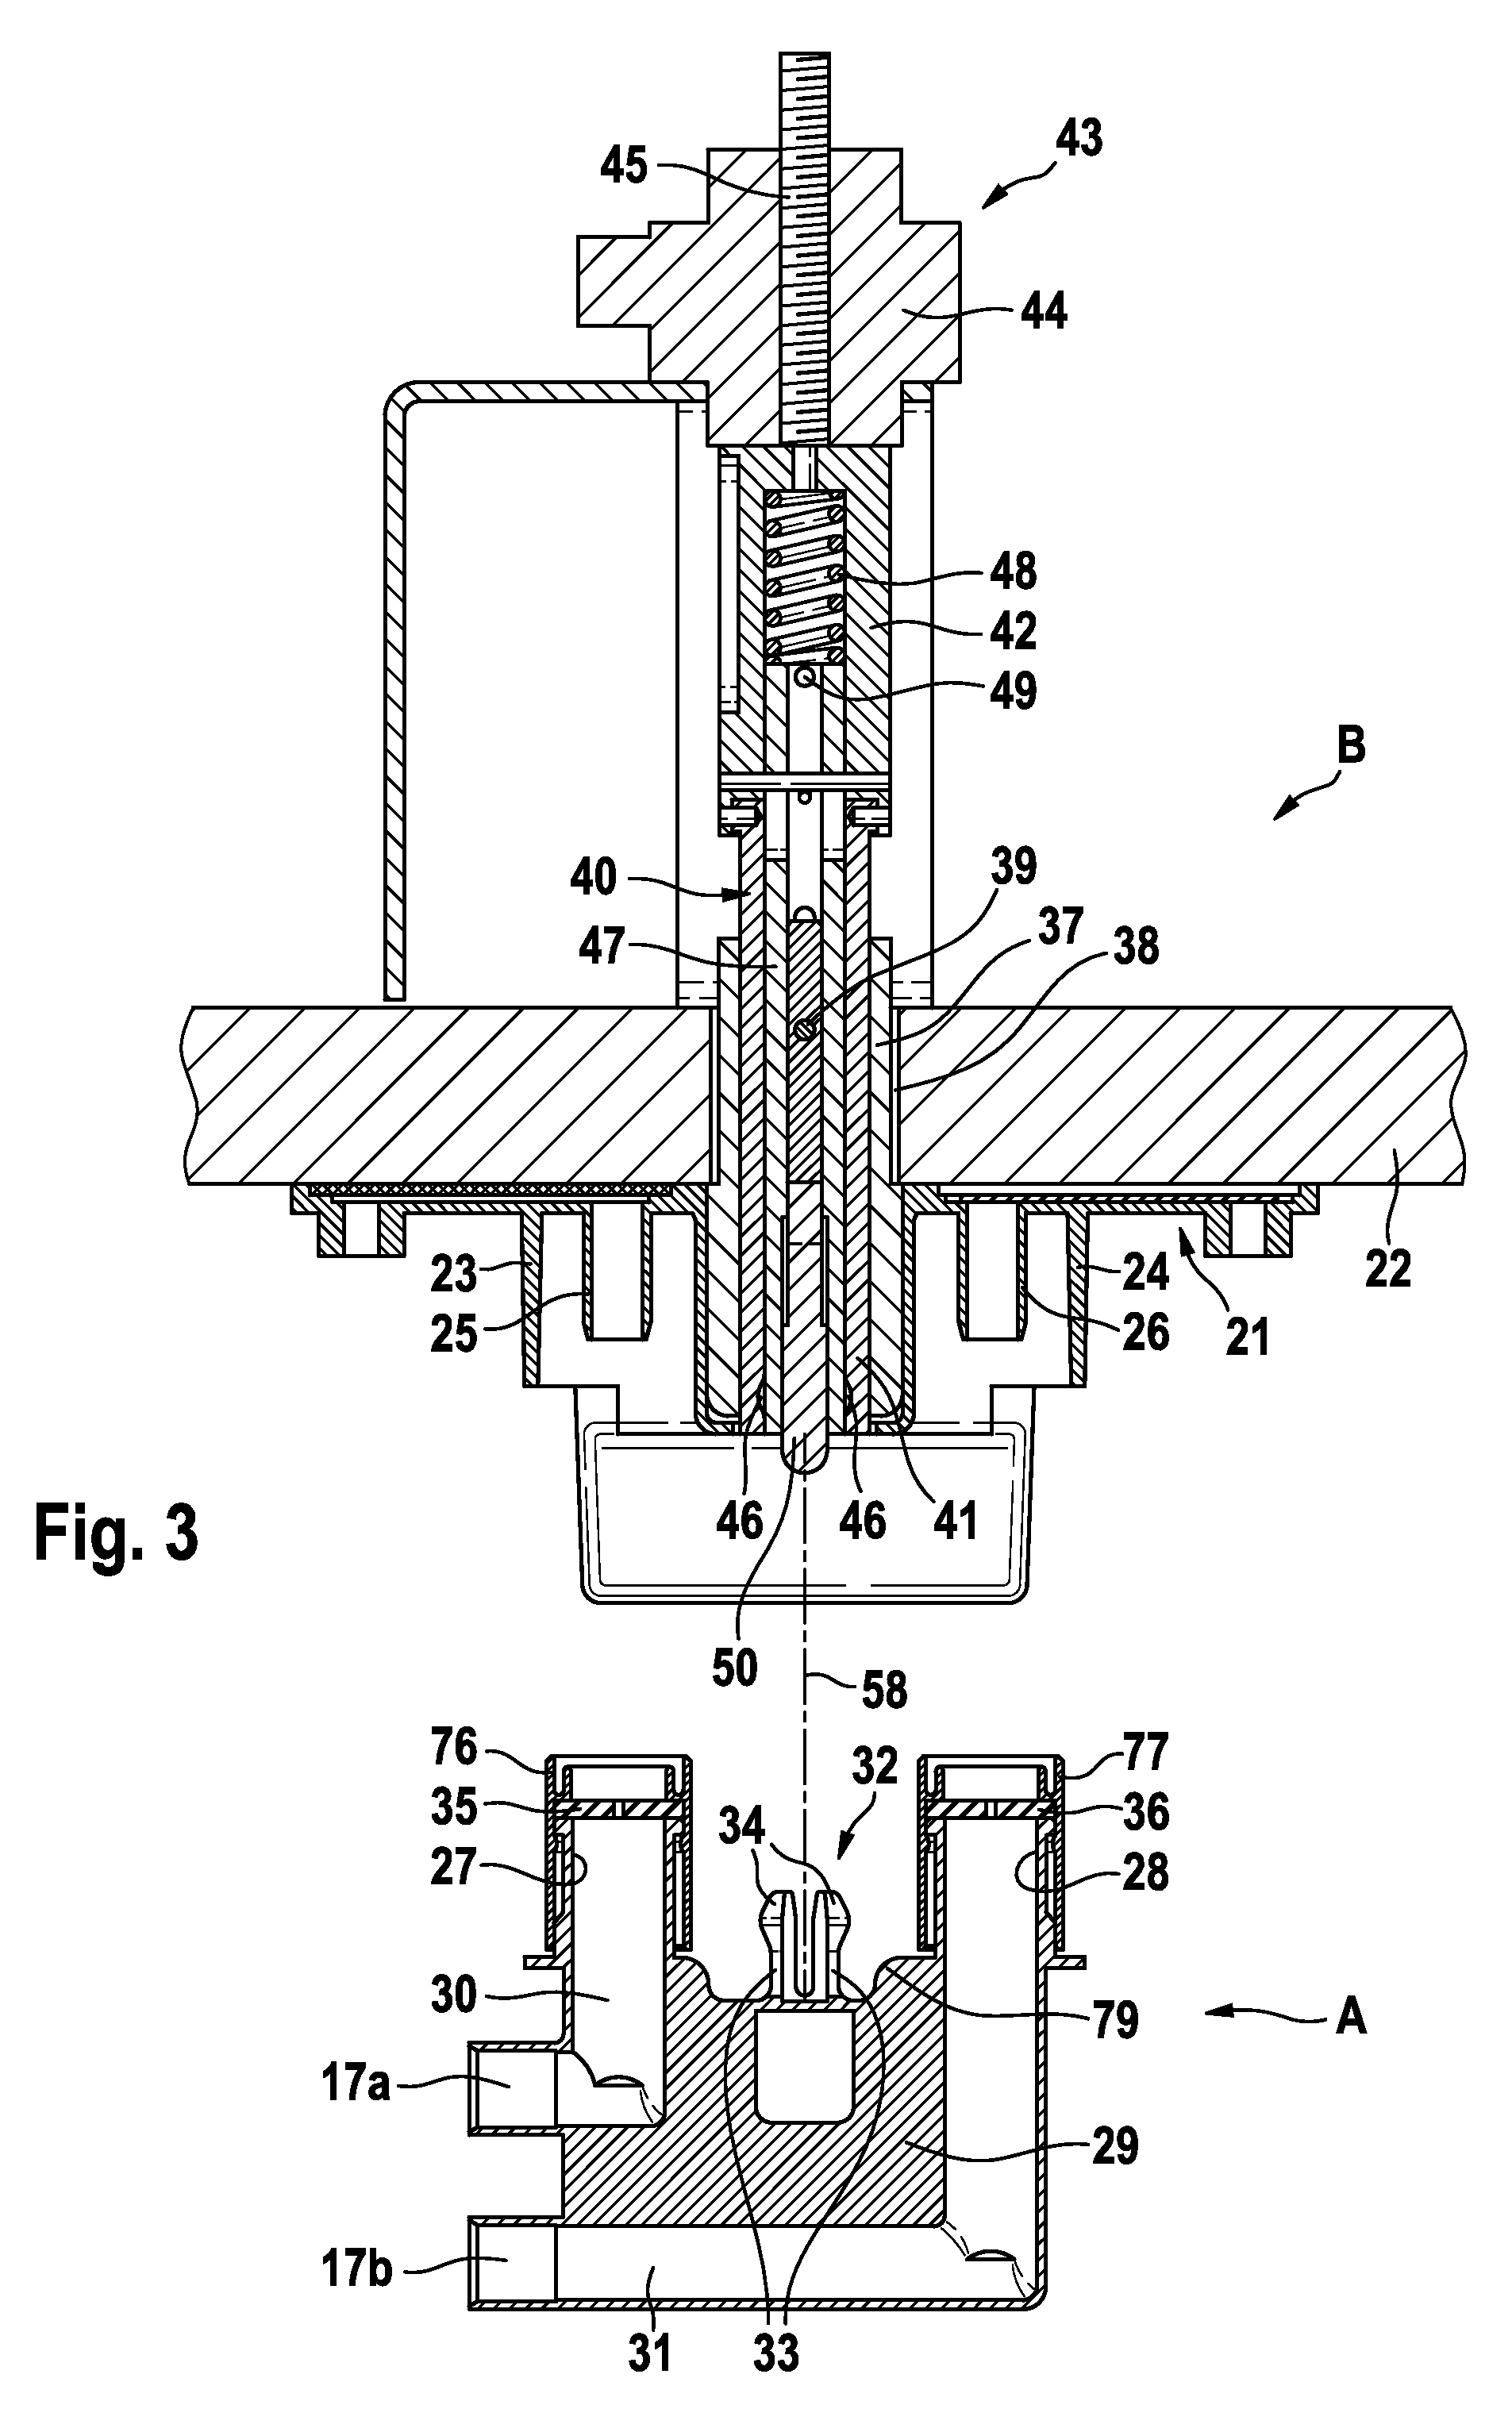 Medical treatment apparatus, device for supplying medical fluids, and apparatus for filling a device for supplying medical fluids